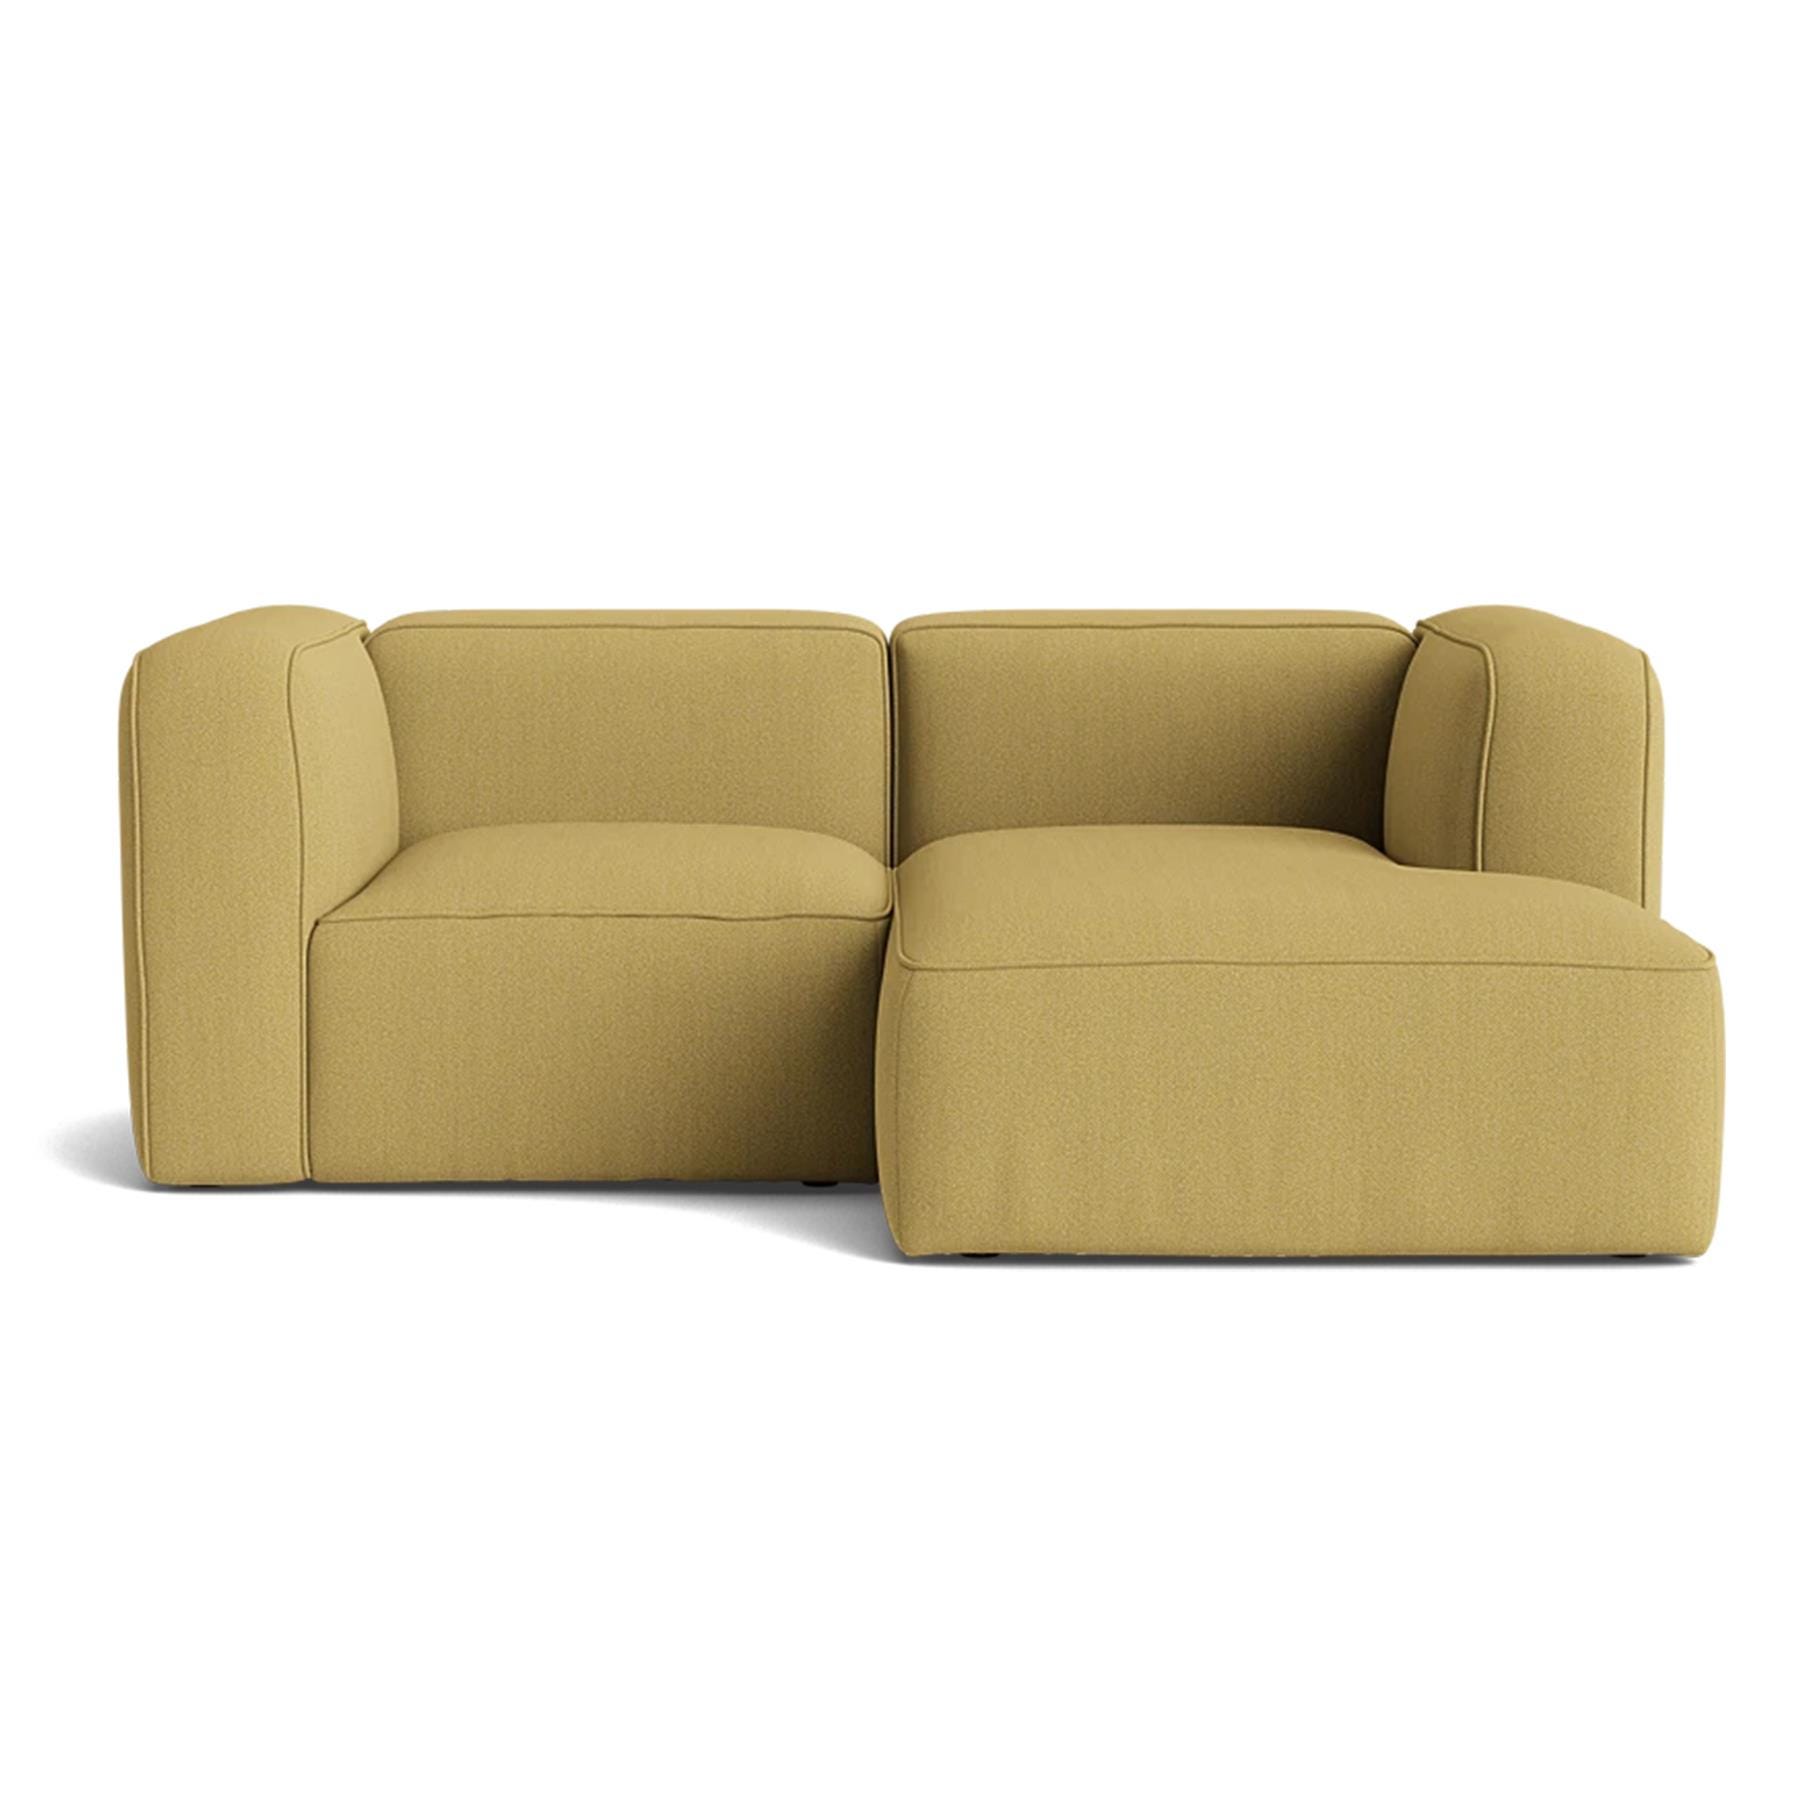 Make Nordic Basecamp Small Sofa Hallingdal 407 Right Yellow Designer Furniture From Holloways Of Ludlow